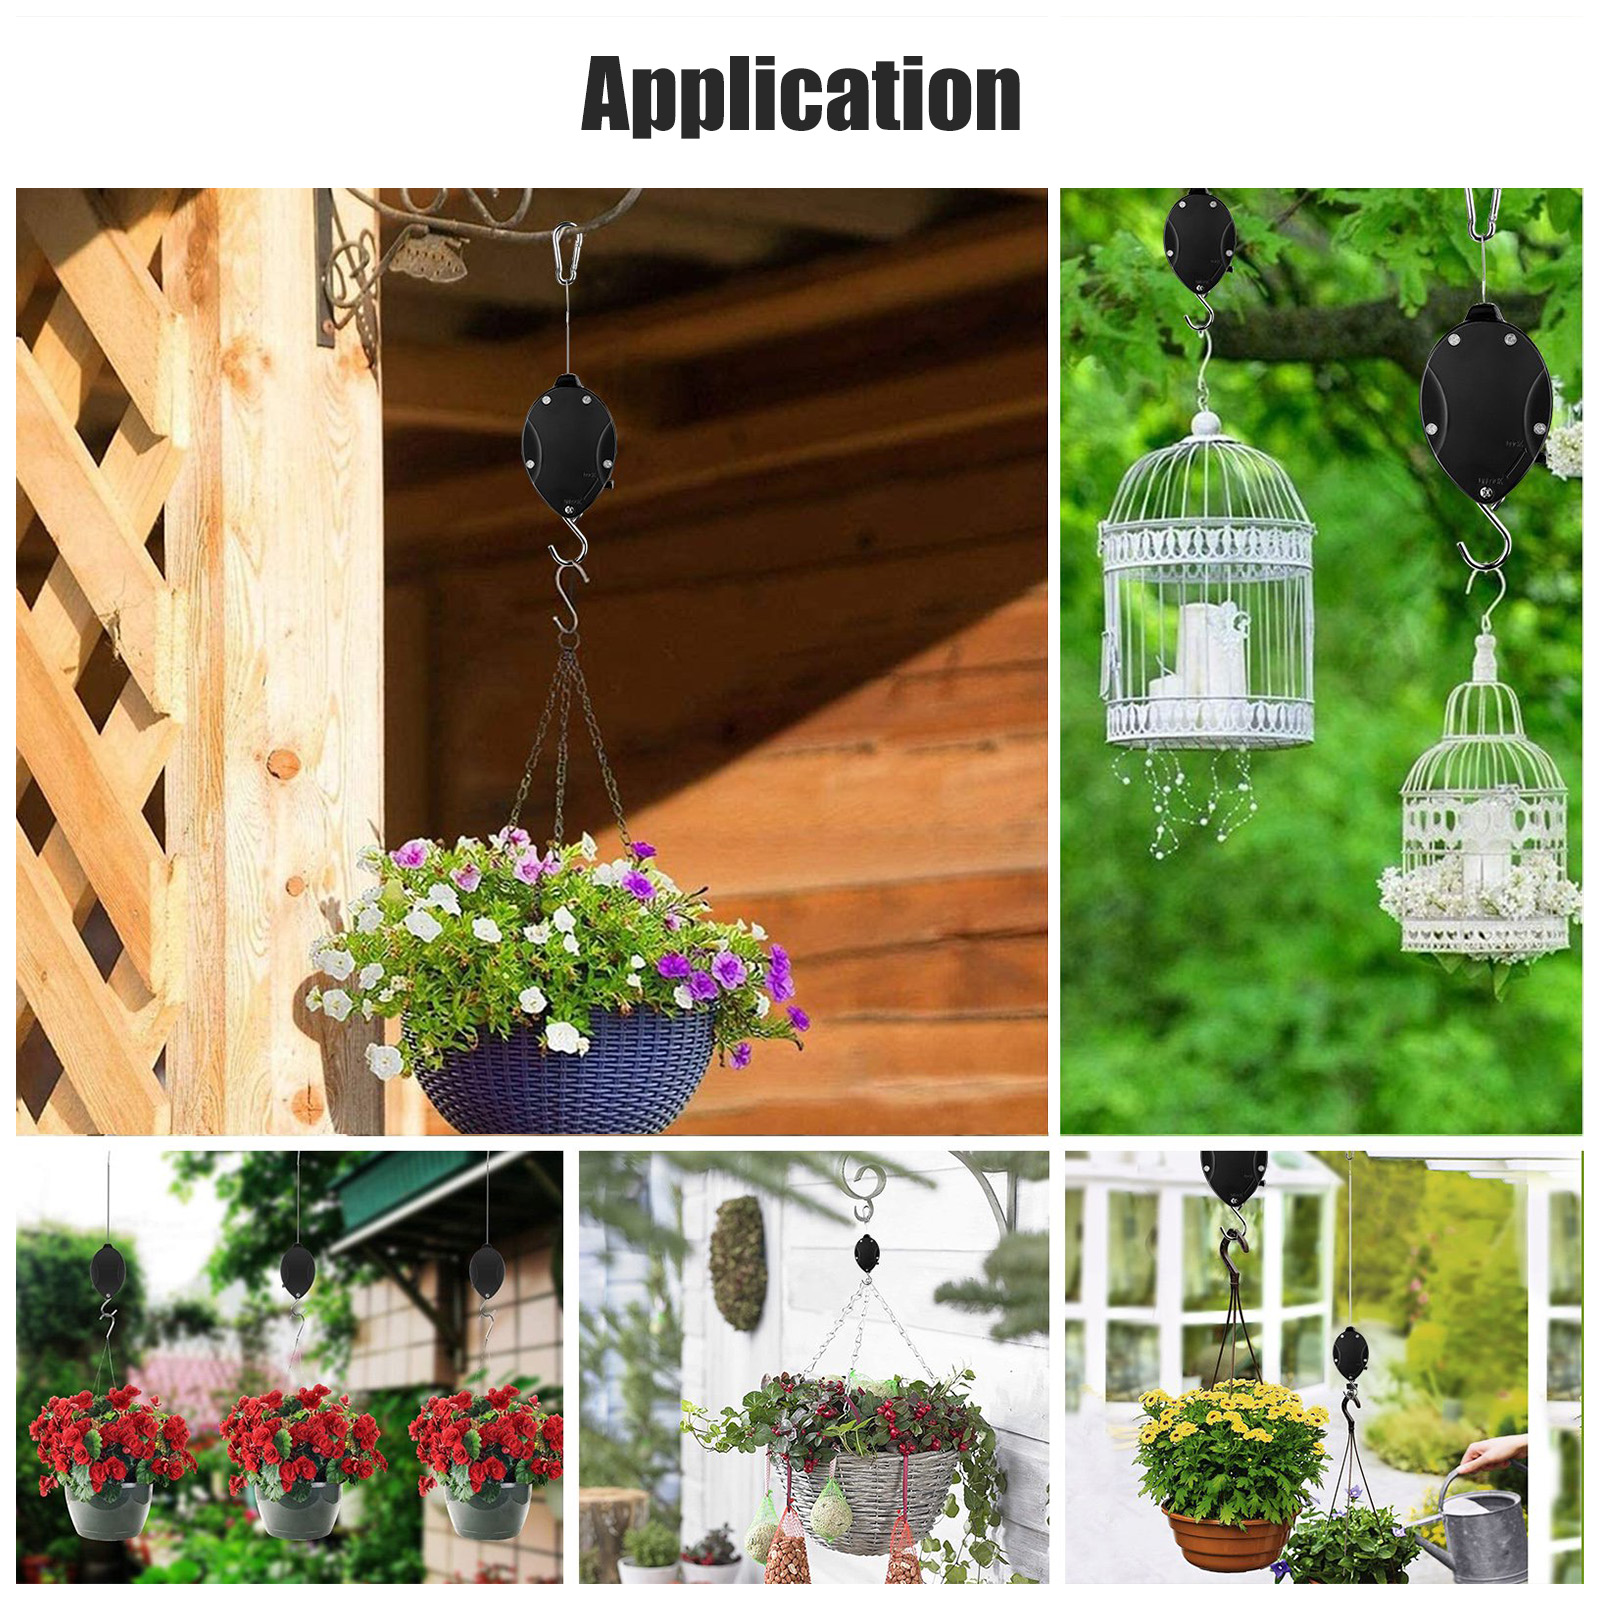 2pcs Retractable Plant Pulley with Locking, TSV Adjustable Plant Hanger Hook, Easy Watering for Hanging Plants, Garden Flower Baskets, Pots and Bird Feeders, Plastic, Black - image 5 of 9